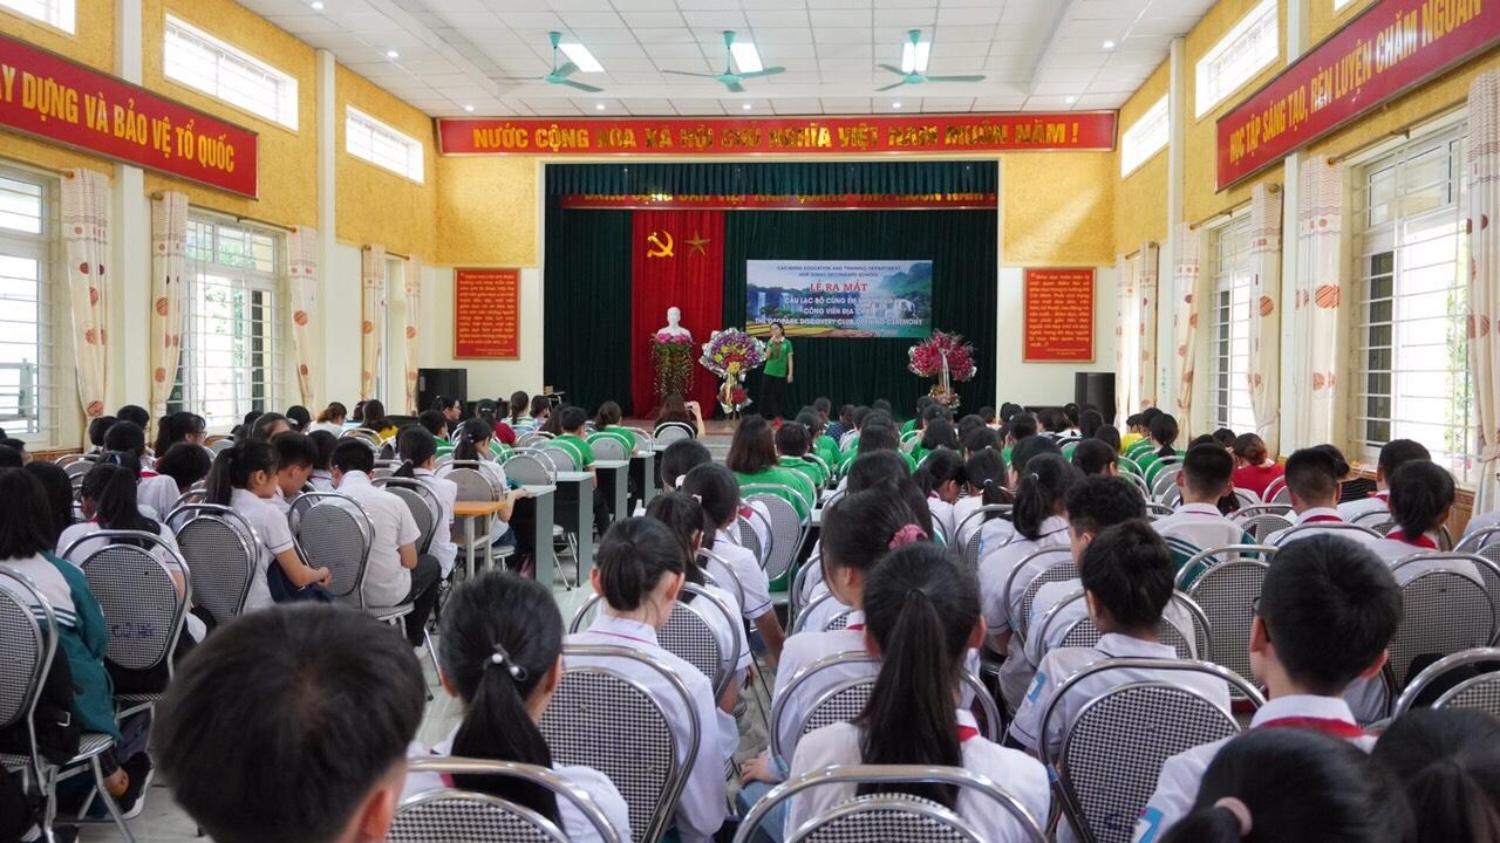 OPENING CEREMONY OF "GEOPARK DISCOVERY CLUB" IN HOP GIANG SECONDARY SCHOOL